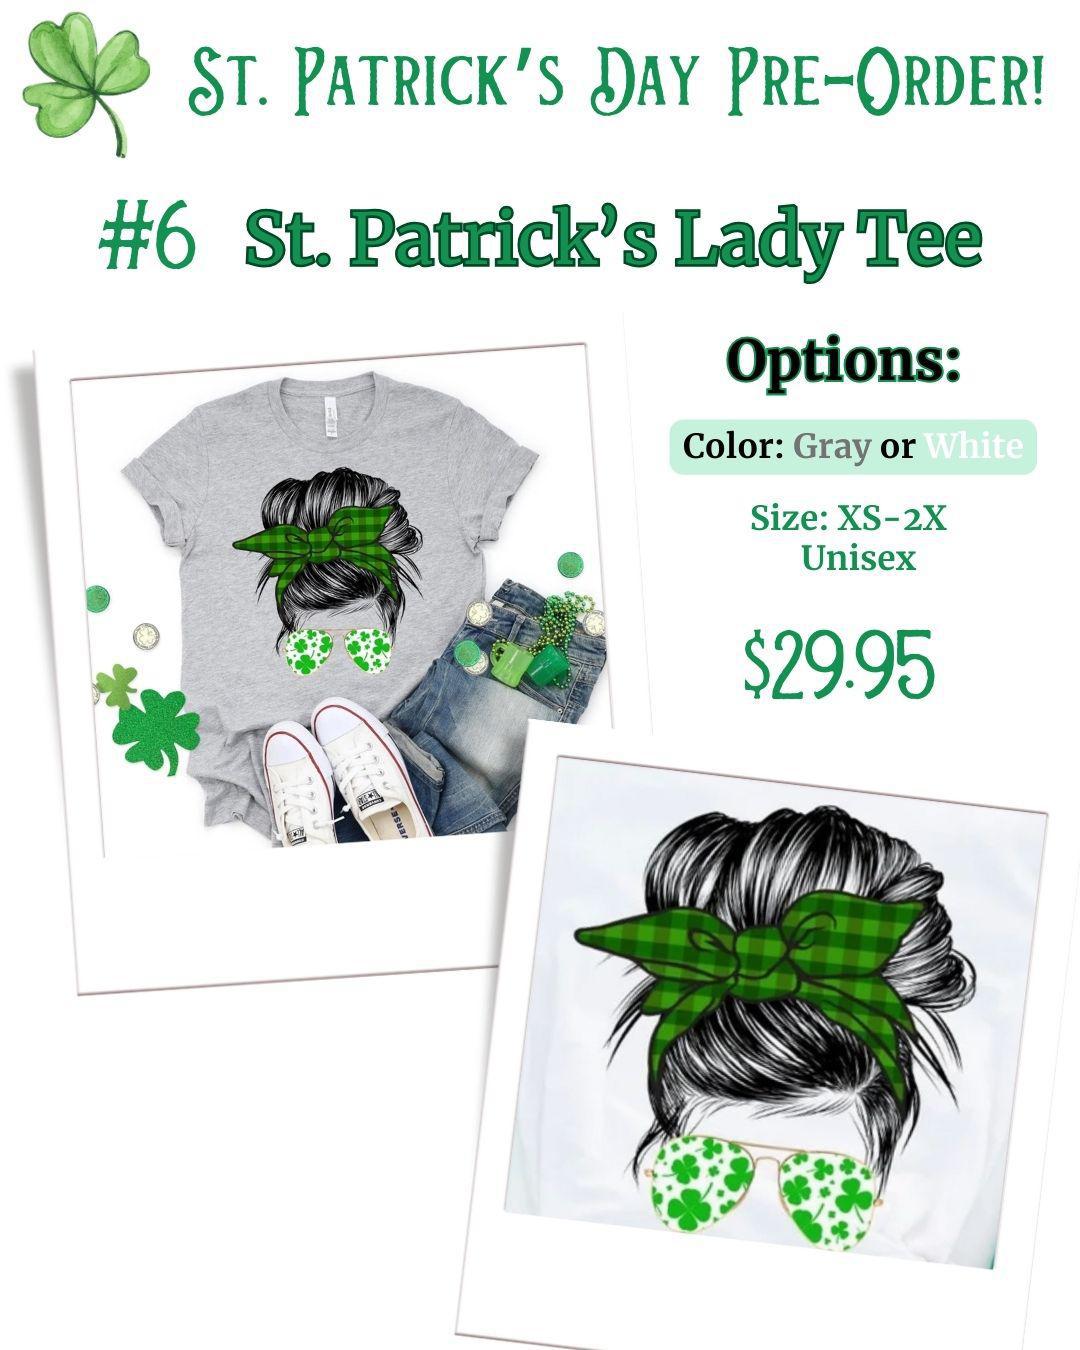 St. Patrick's Day Pre-Order: Lady Tee